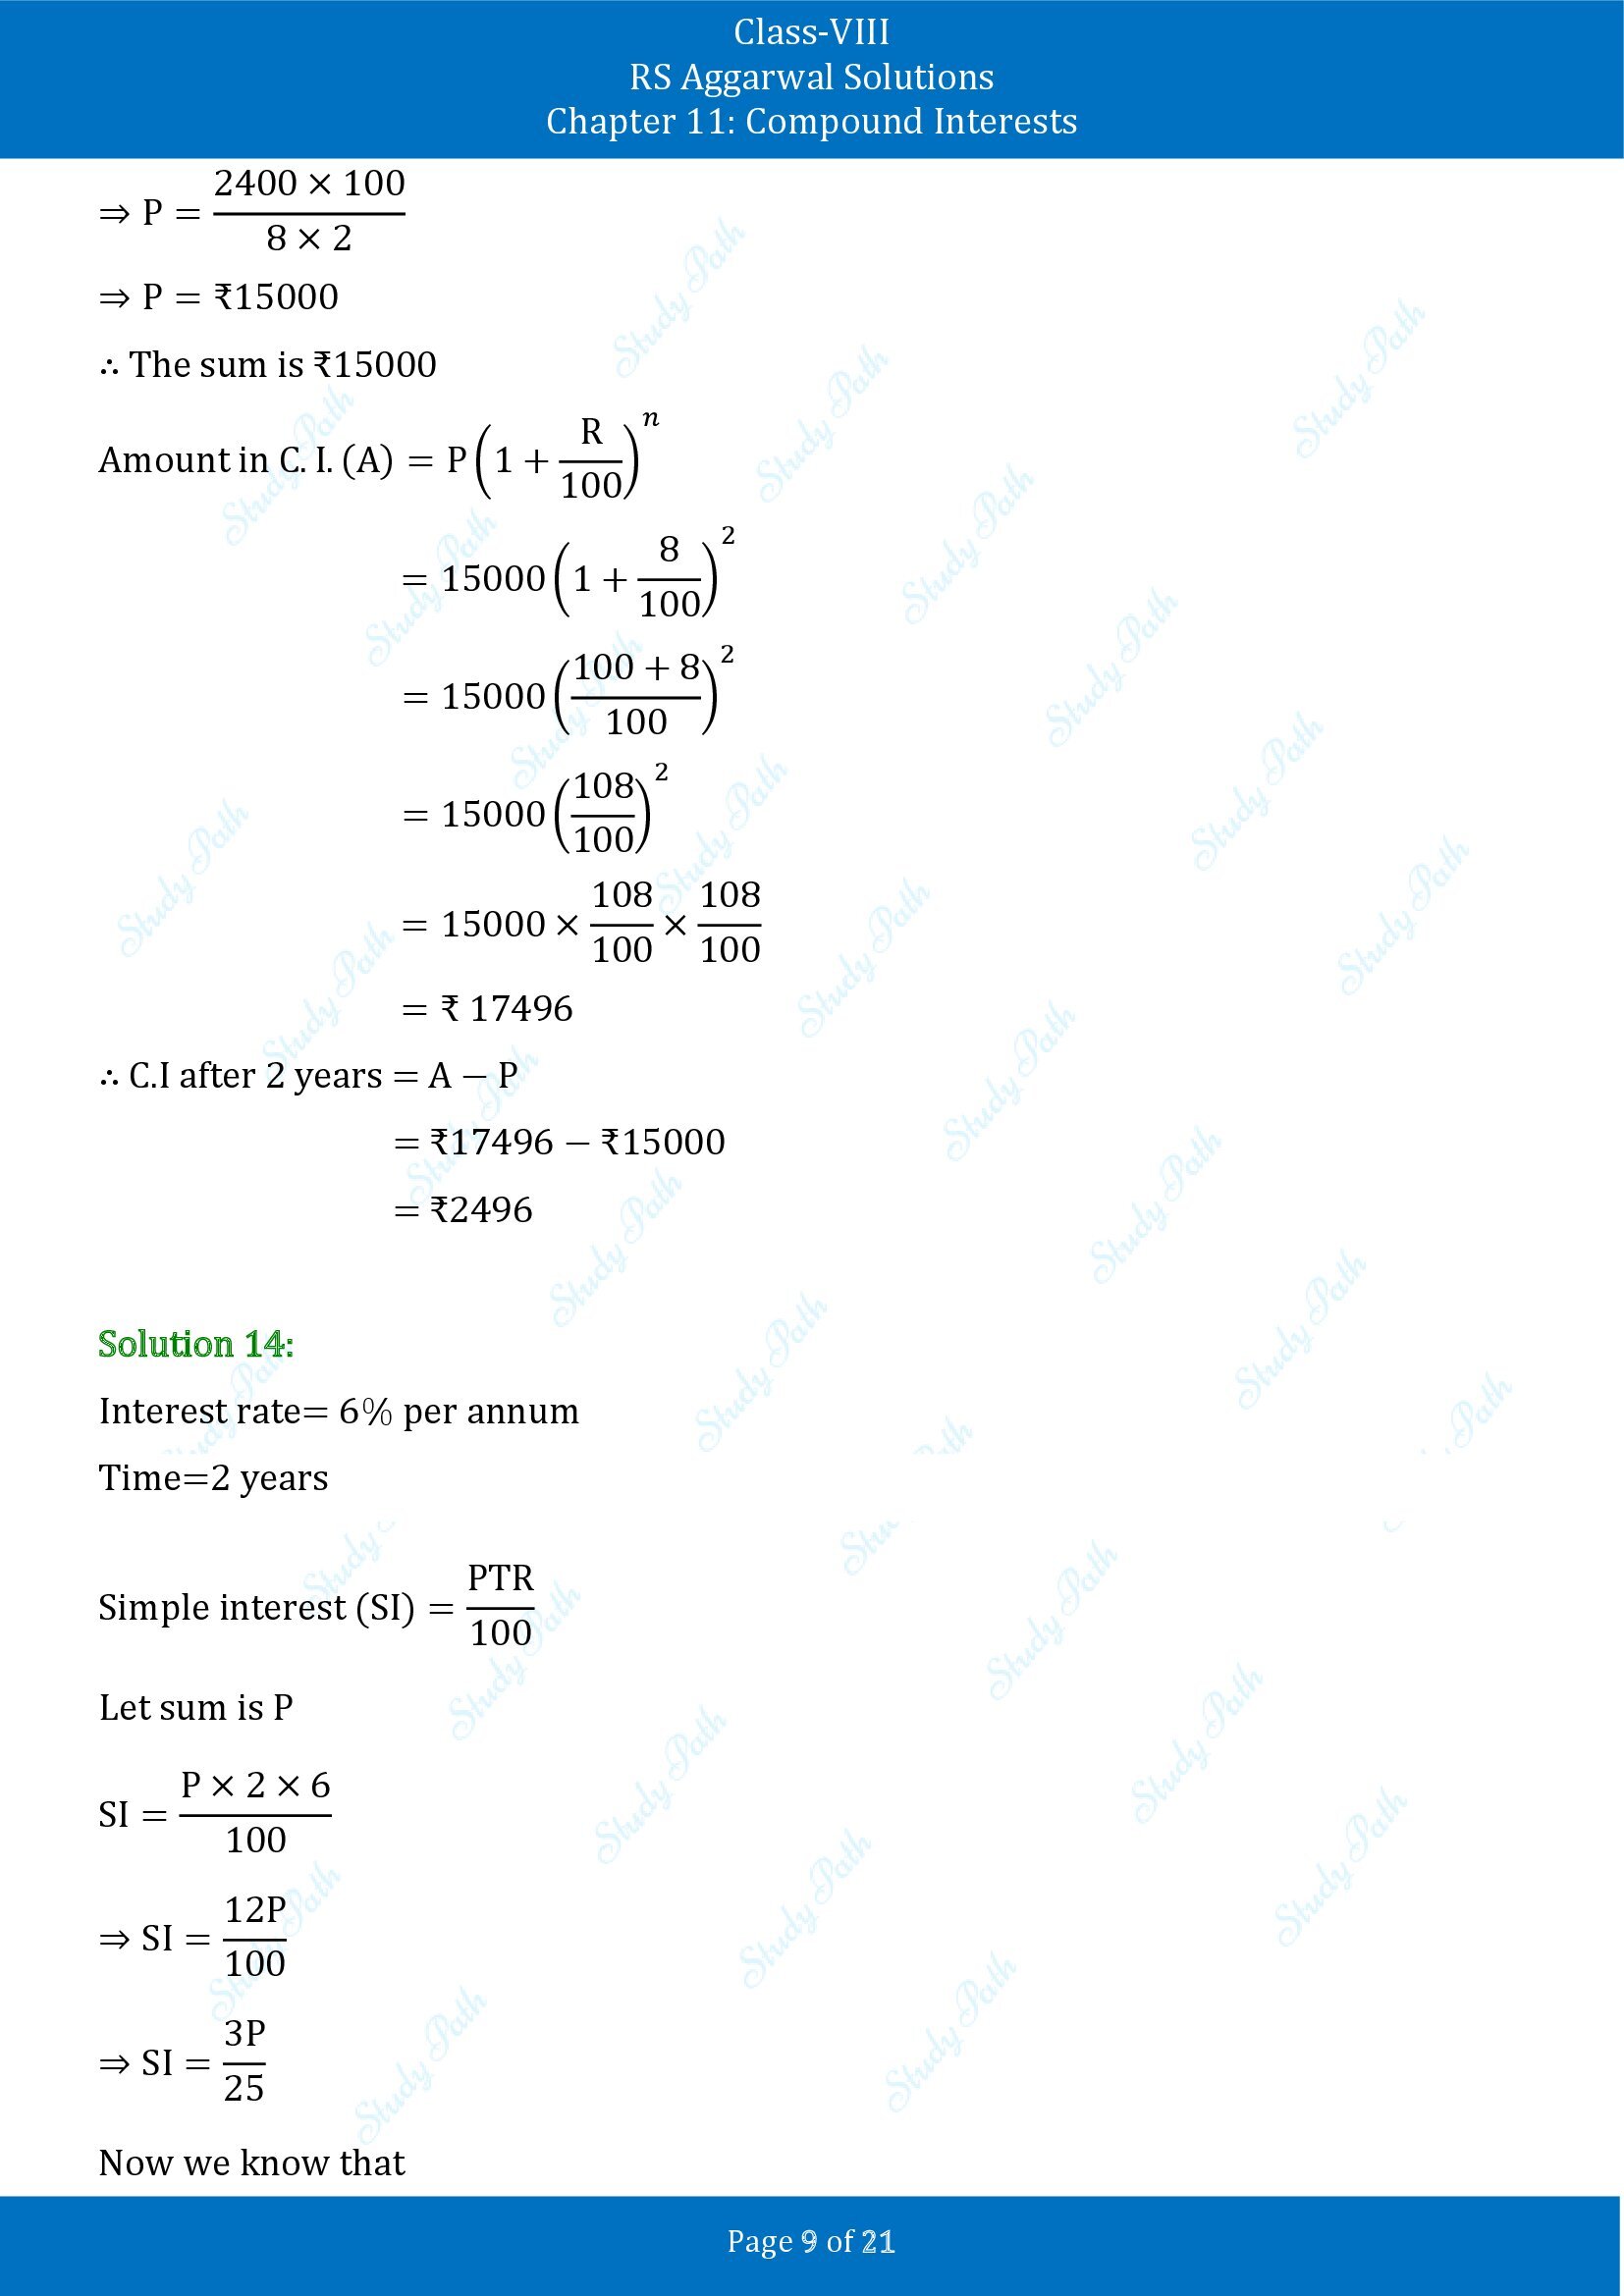 RS Aggarwal Solutions Class 8 Chapter 11 Compound Interests Exercise 11B 00009